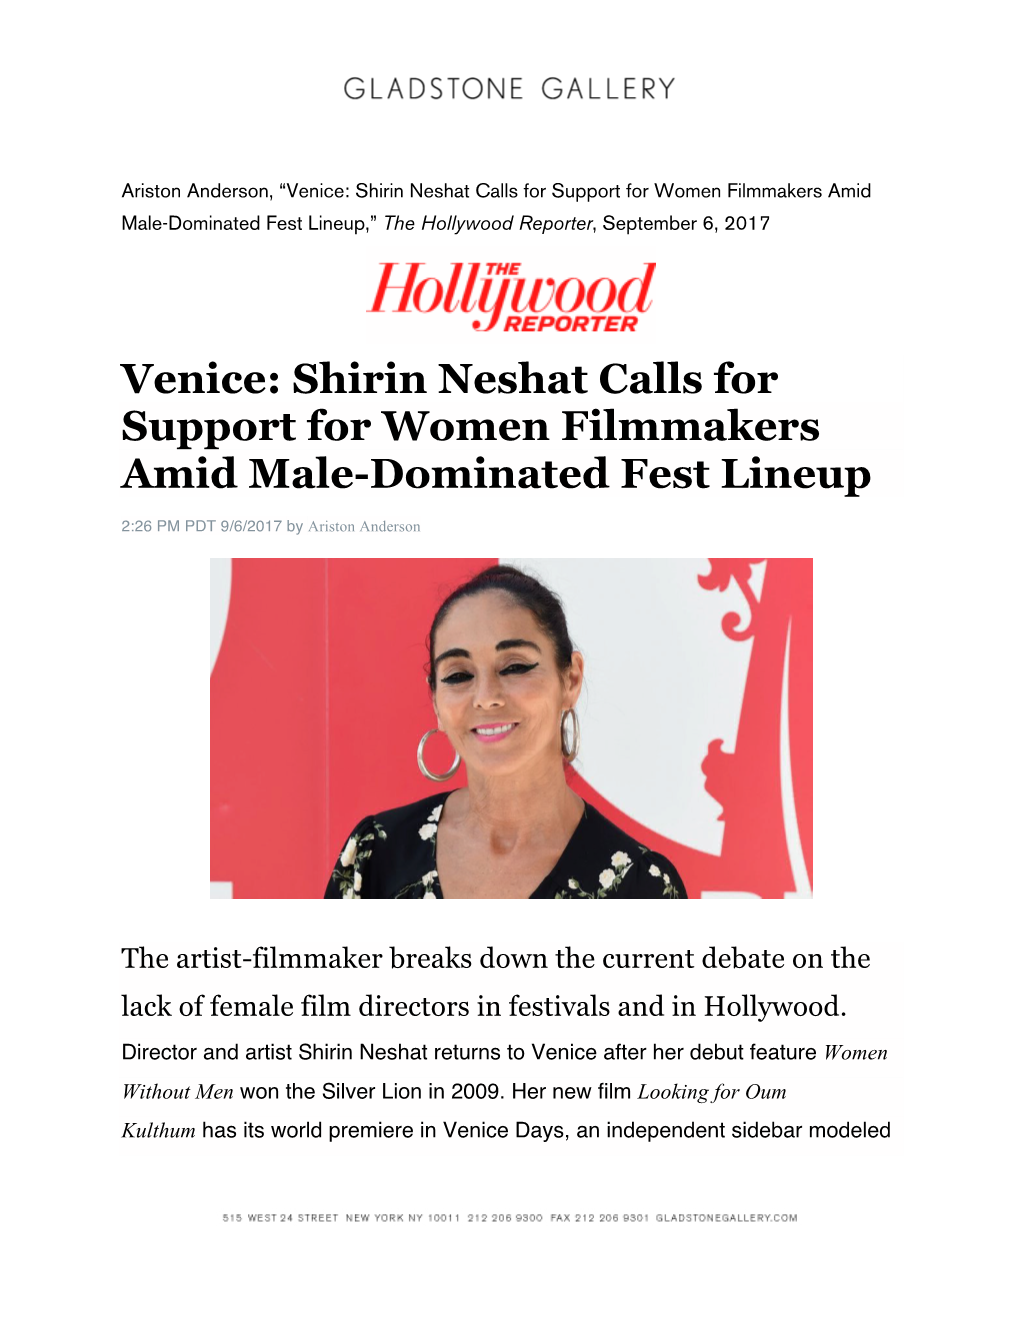 Shirin Neshat Calls for Support for Women Filmmakers Amid Male-Dominated Fest Lineup,” the Hollywood Reporter, September 6, 2017